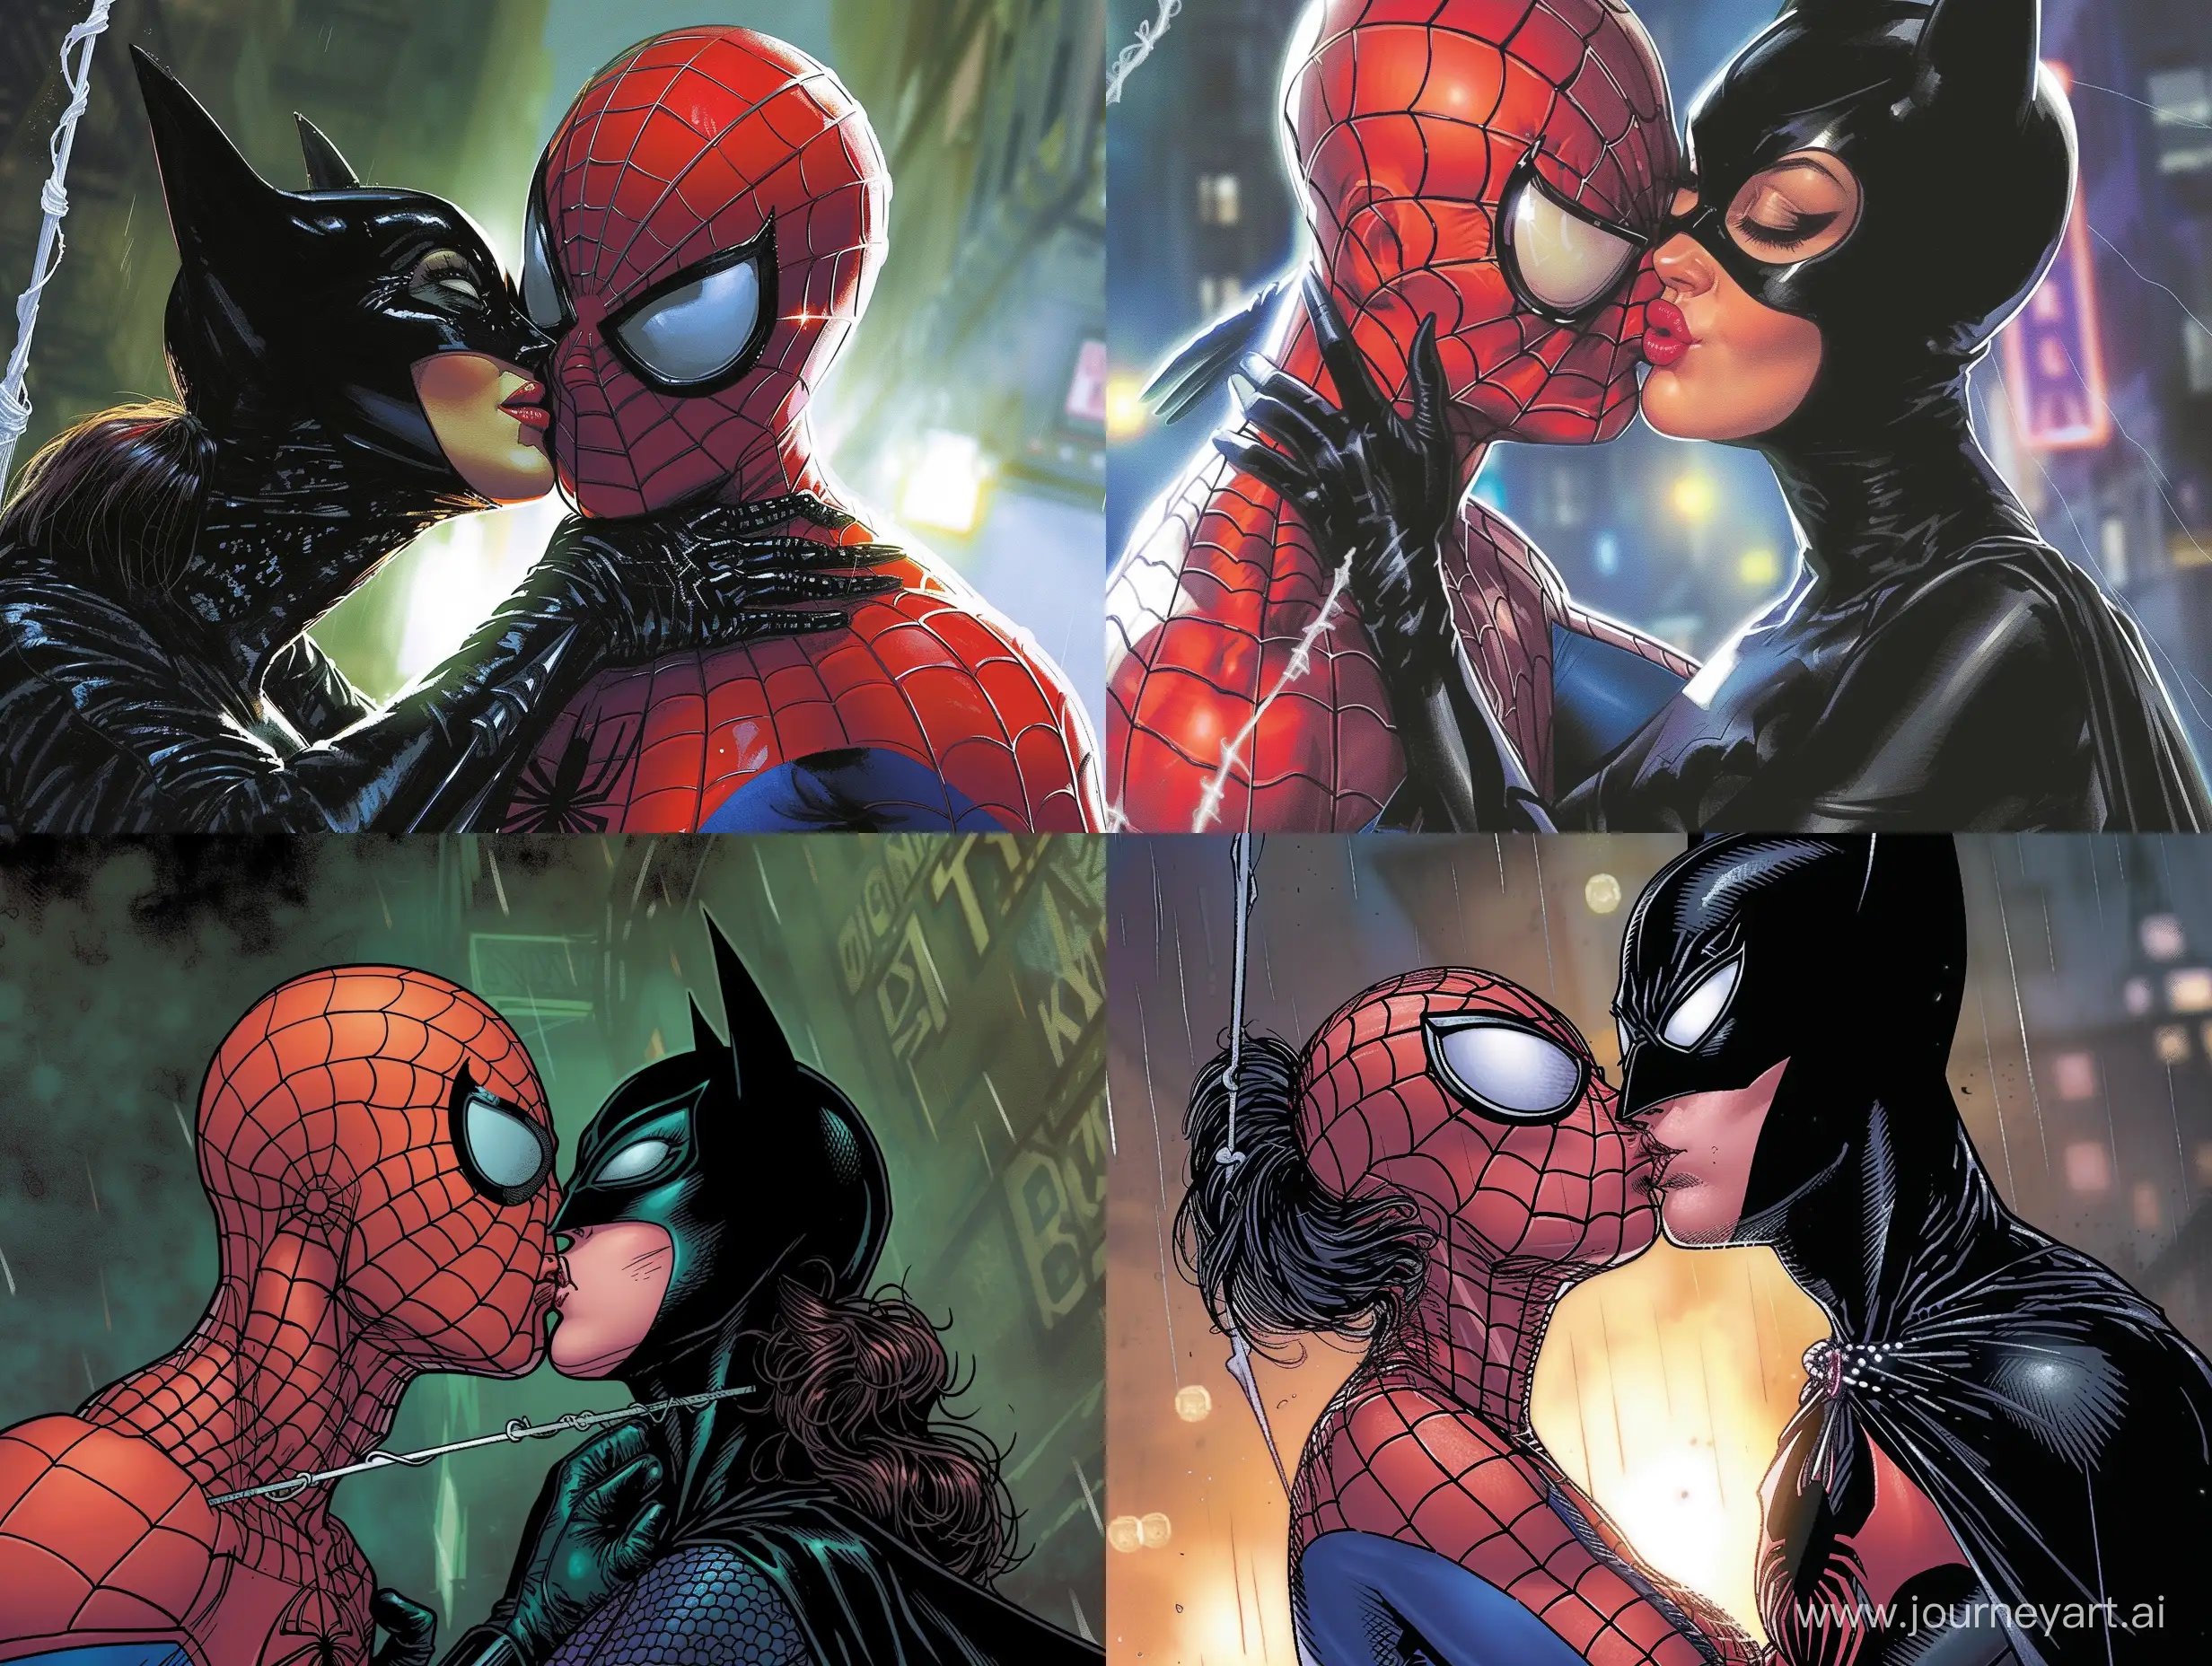 Superhero-Romance-SpiderMan-Sharing-a-Tender-Moment-with-Catwoman